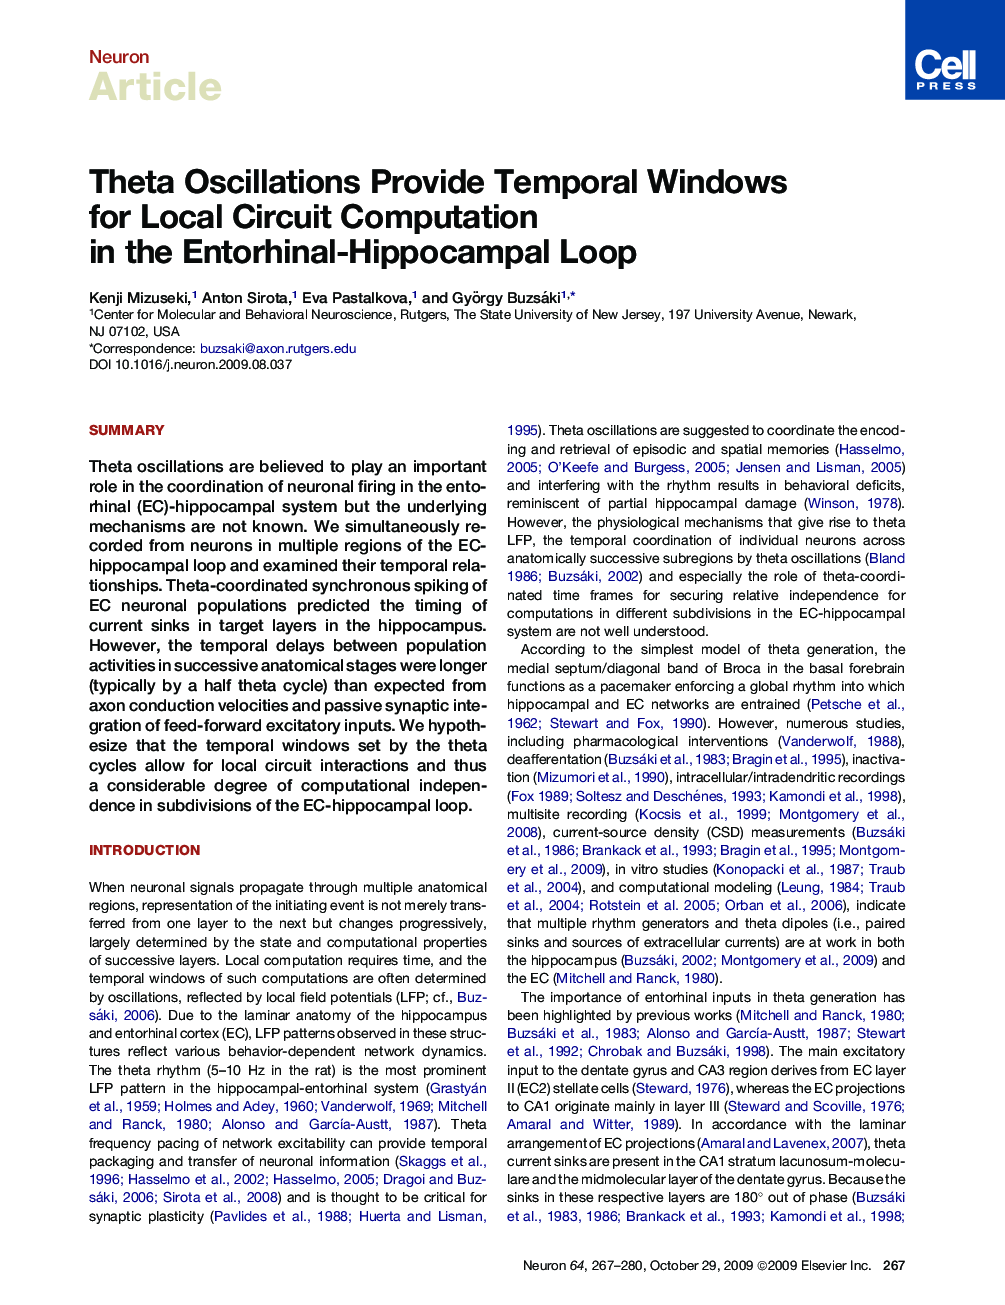 Theta Oscillations Provide Temporal Windows for Local Circuit Computation in the Entorhinal-Hippocampal Loop